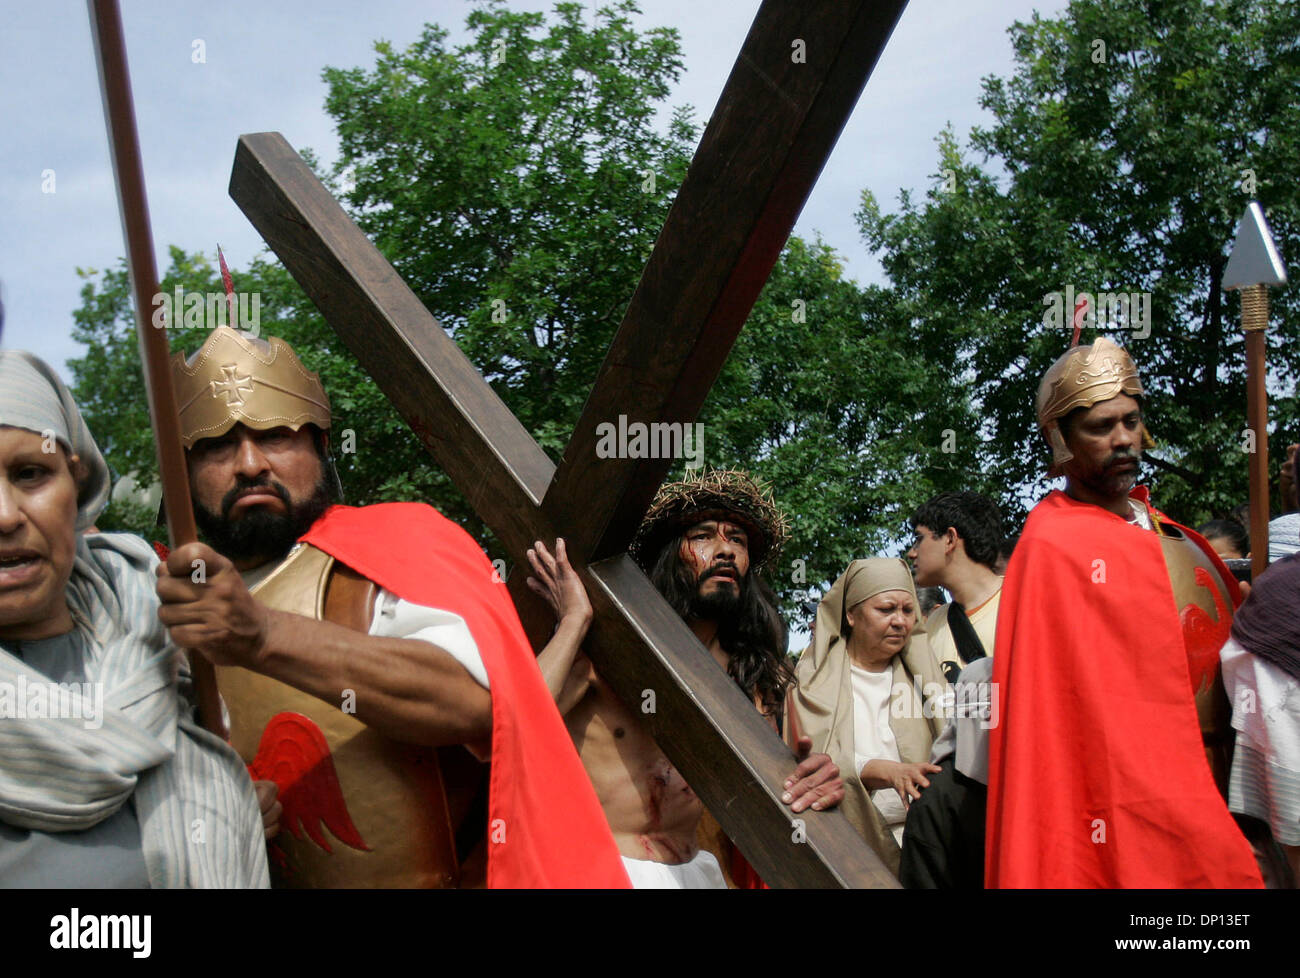 Apr 14, 2006; San Antonio, TX, USA; Derly Cirlos, portraying Jesus in San Fernando Cathedral's annual Via Crucis carrying his own cross on his way to being crucified, passes through Milam Park in San Antonio. Mandatory Credit: Photo by Mike Kane/ZUMA Press. (©) Copyright 2006 by San Antonio Express-News Stock Photo